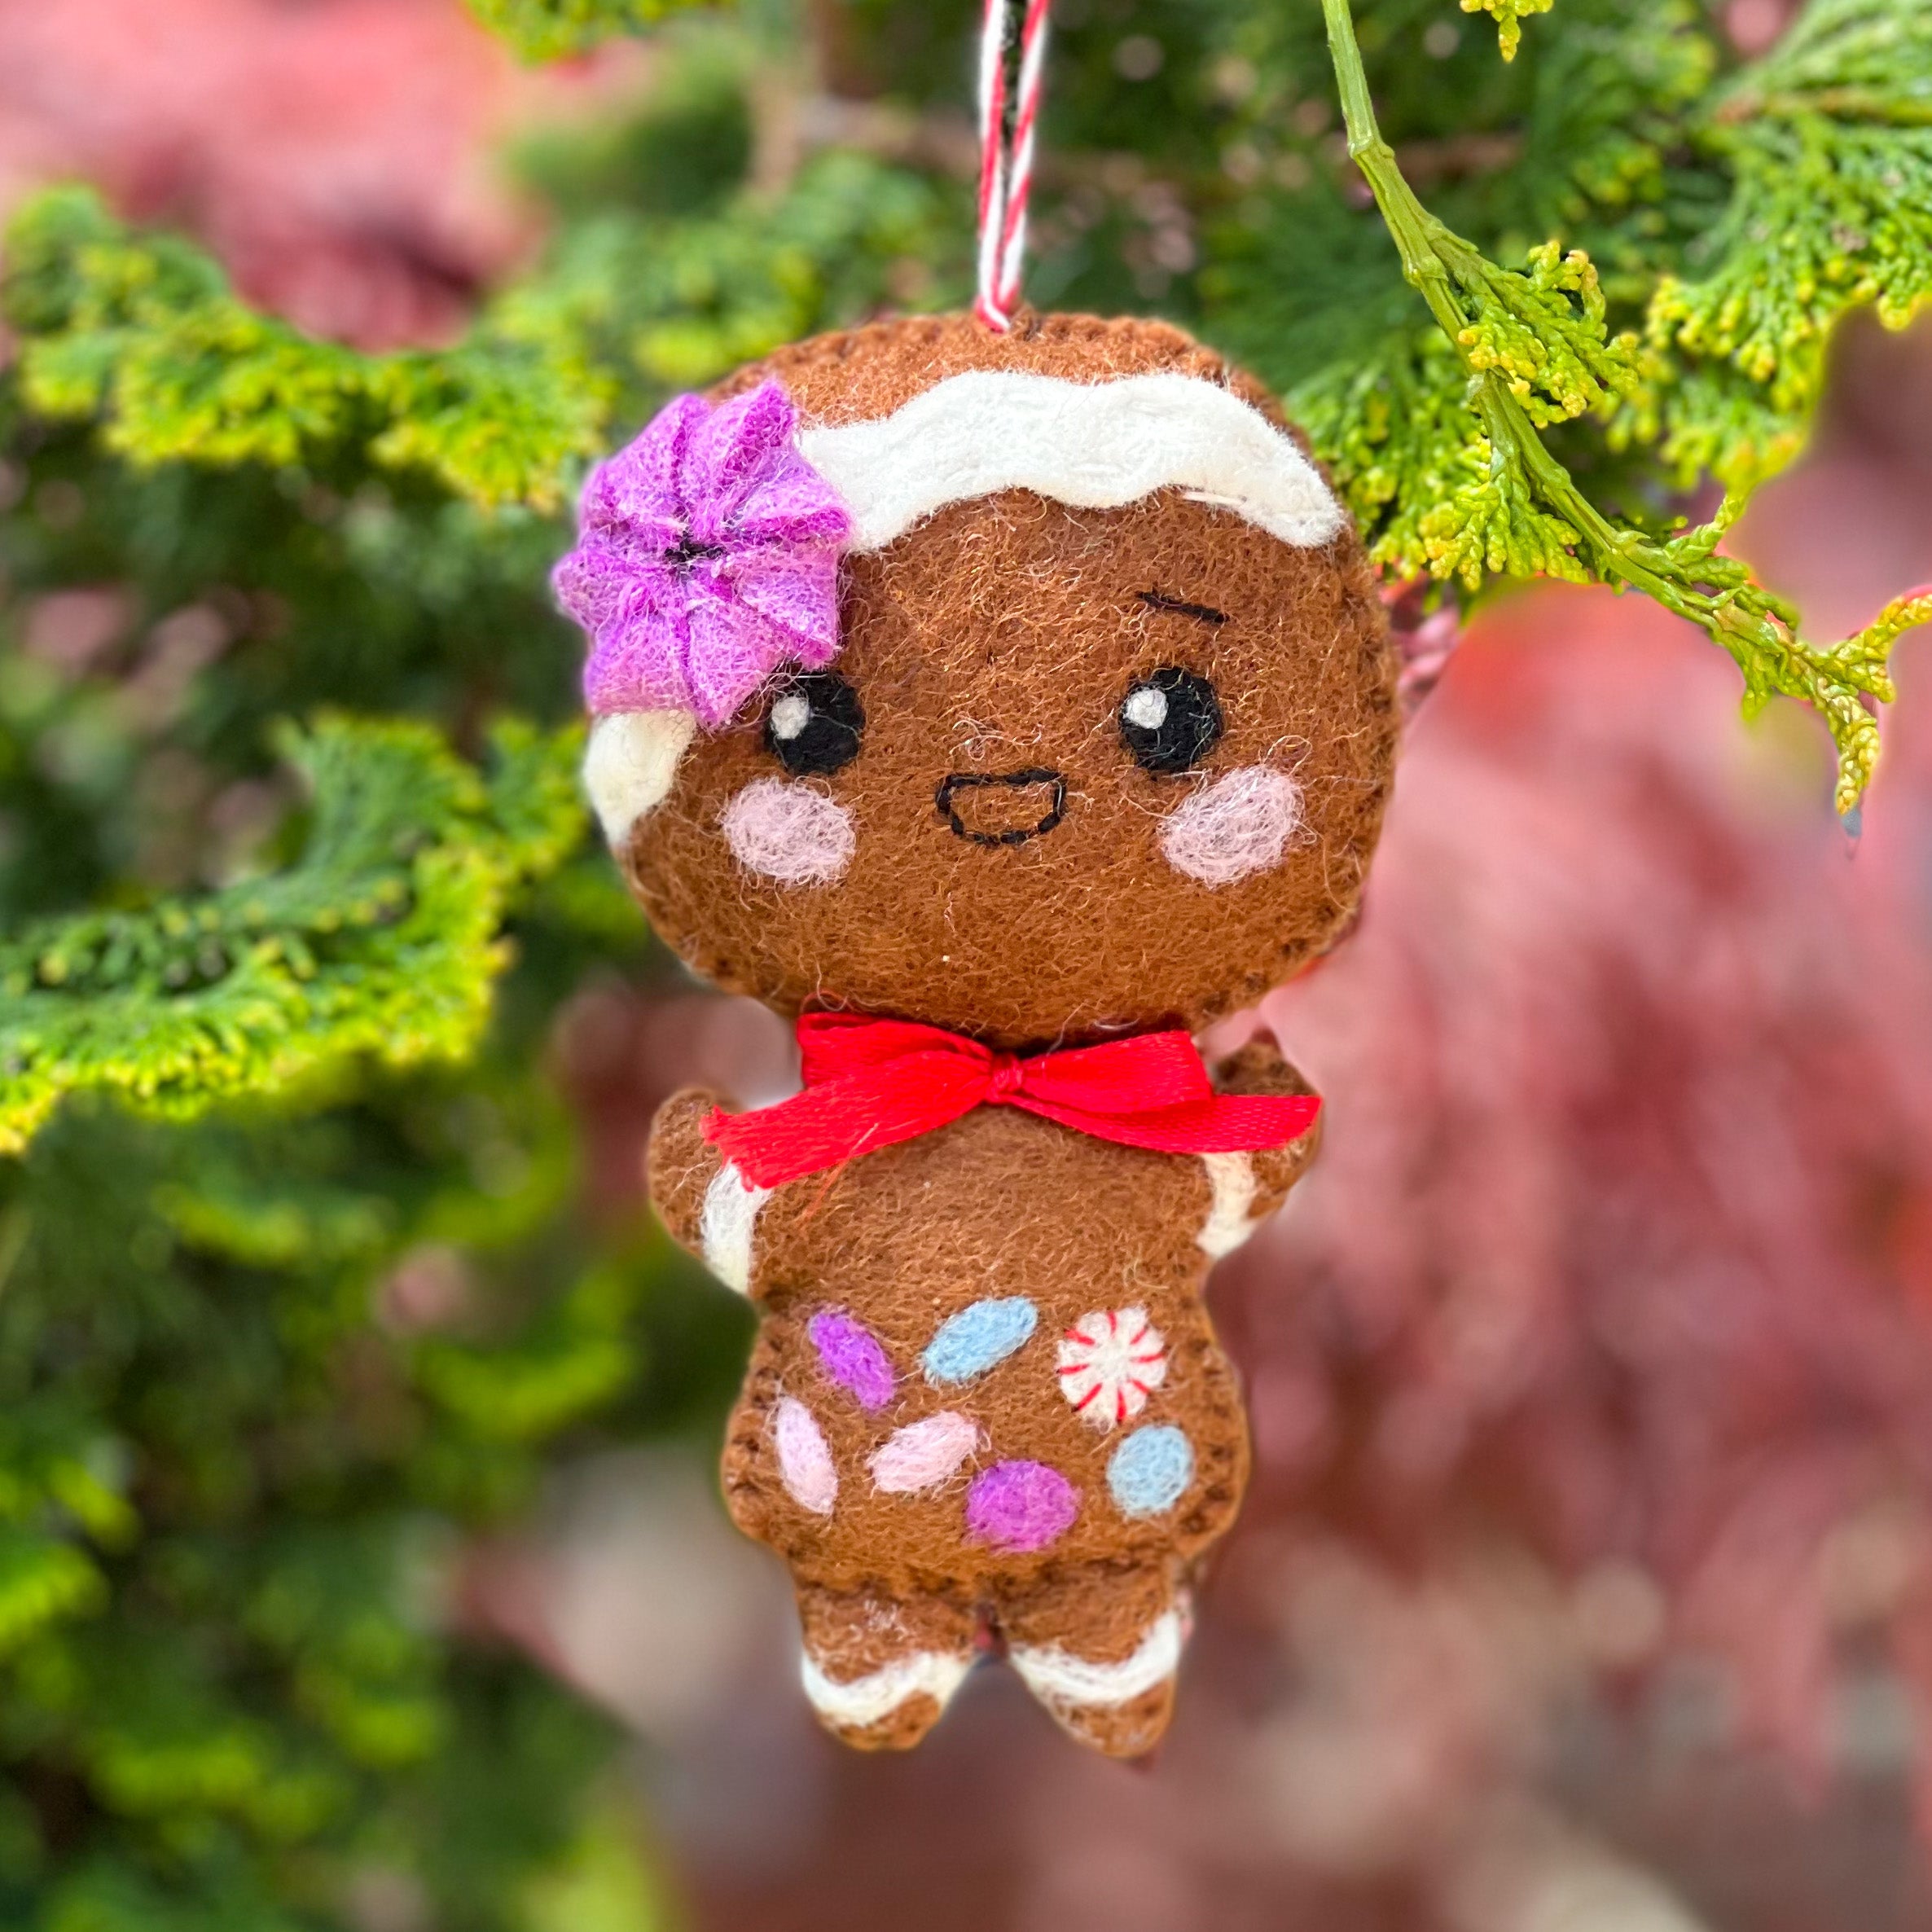 Handfelted Ornament Gingerbread Girl